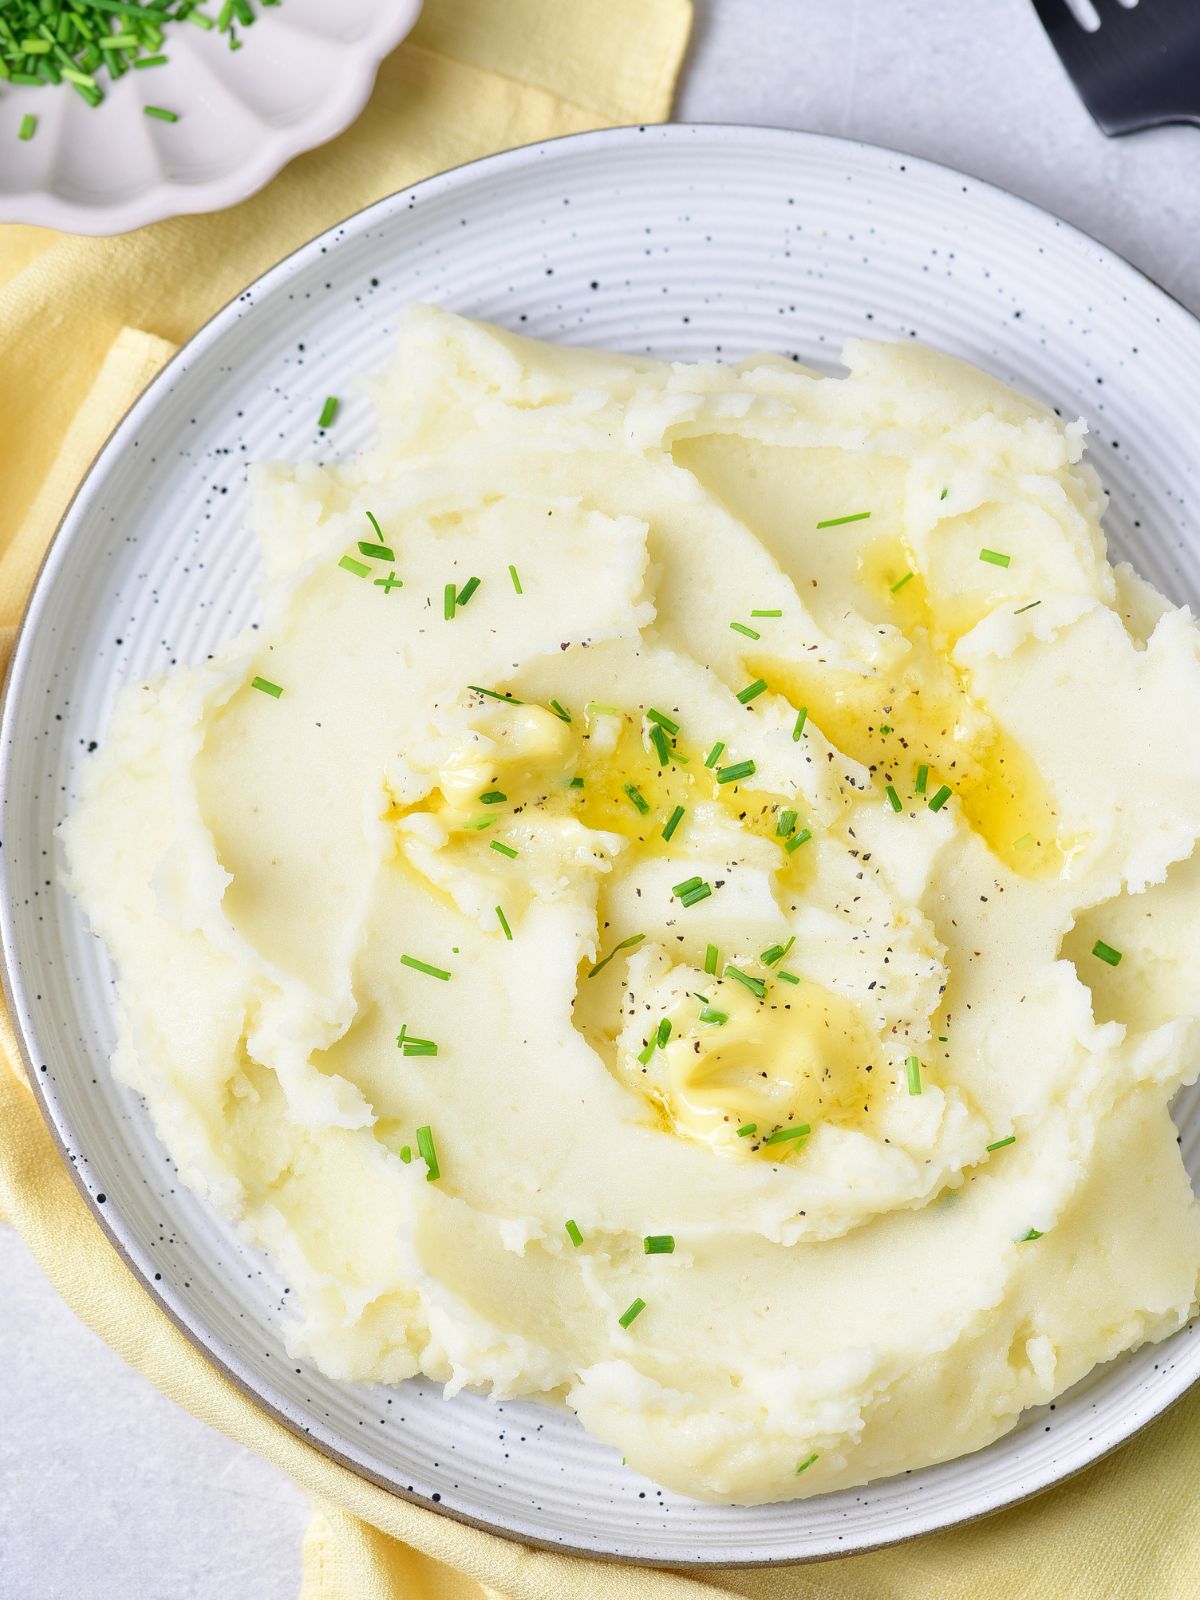 mashed potatoes recipe on plate with chopped chives and butter.